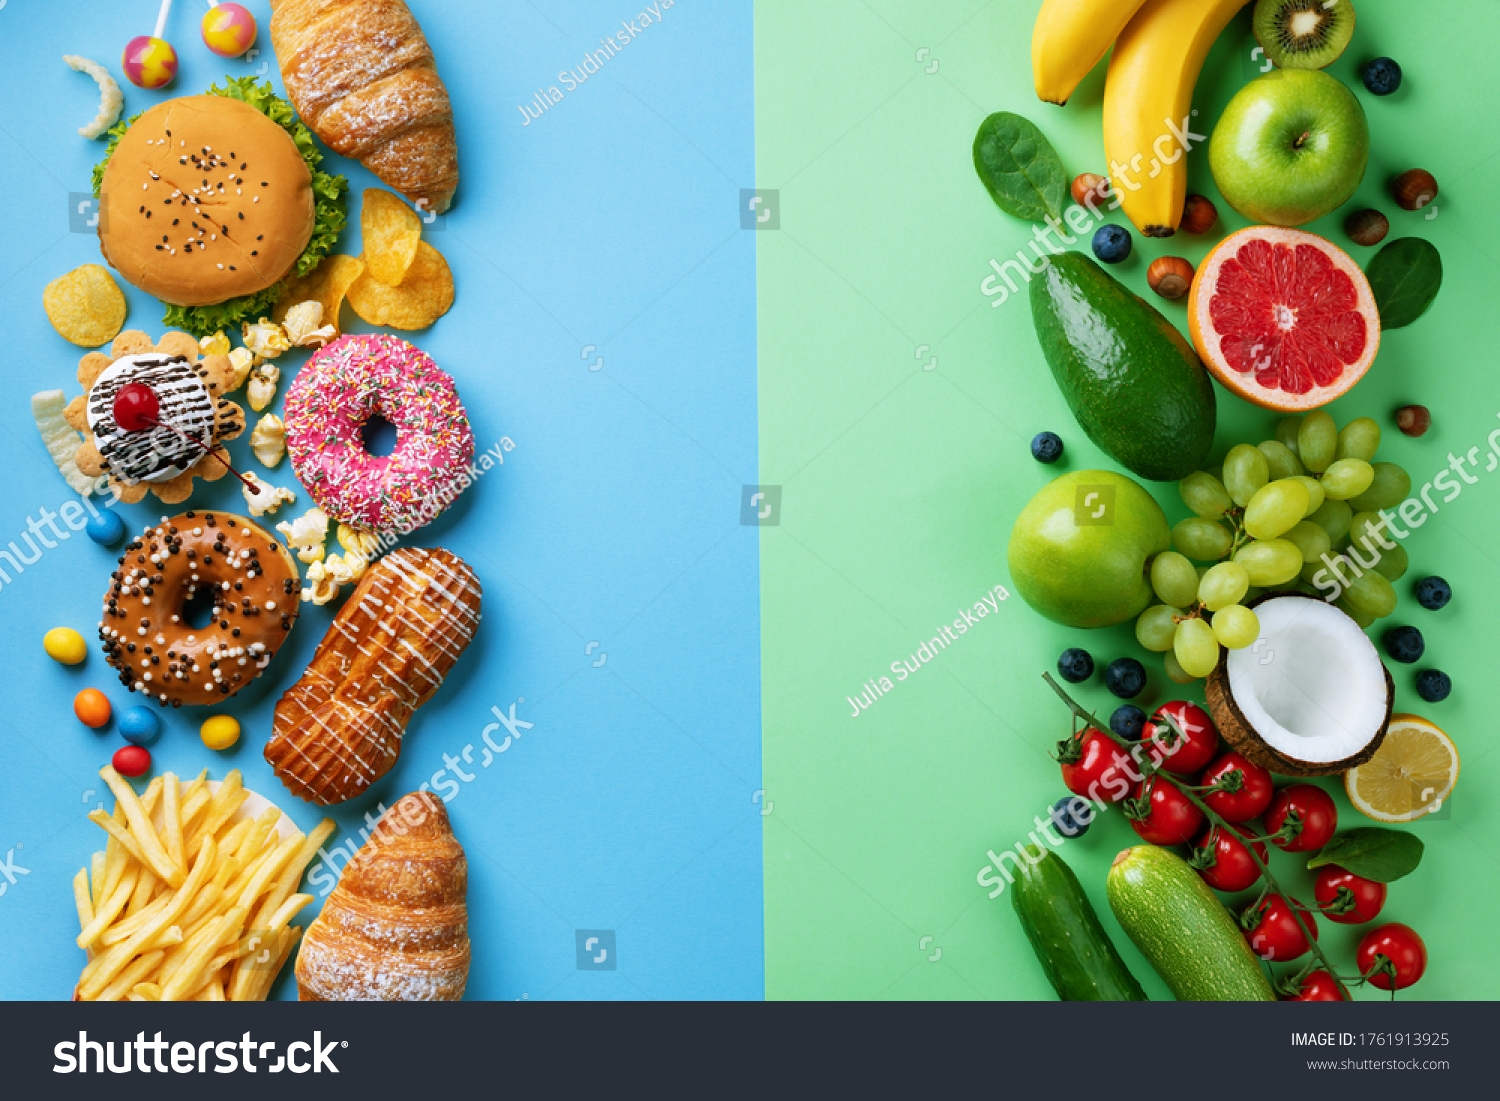 Healthy and unhealthy food background from fruits and vegetables vs fast food, sweets and pastry top view. Diet and detox against calorie and overweight lifestyle concept. #1761913925